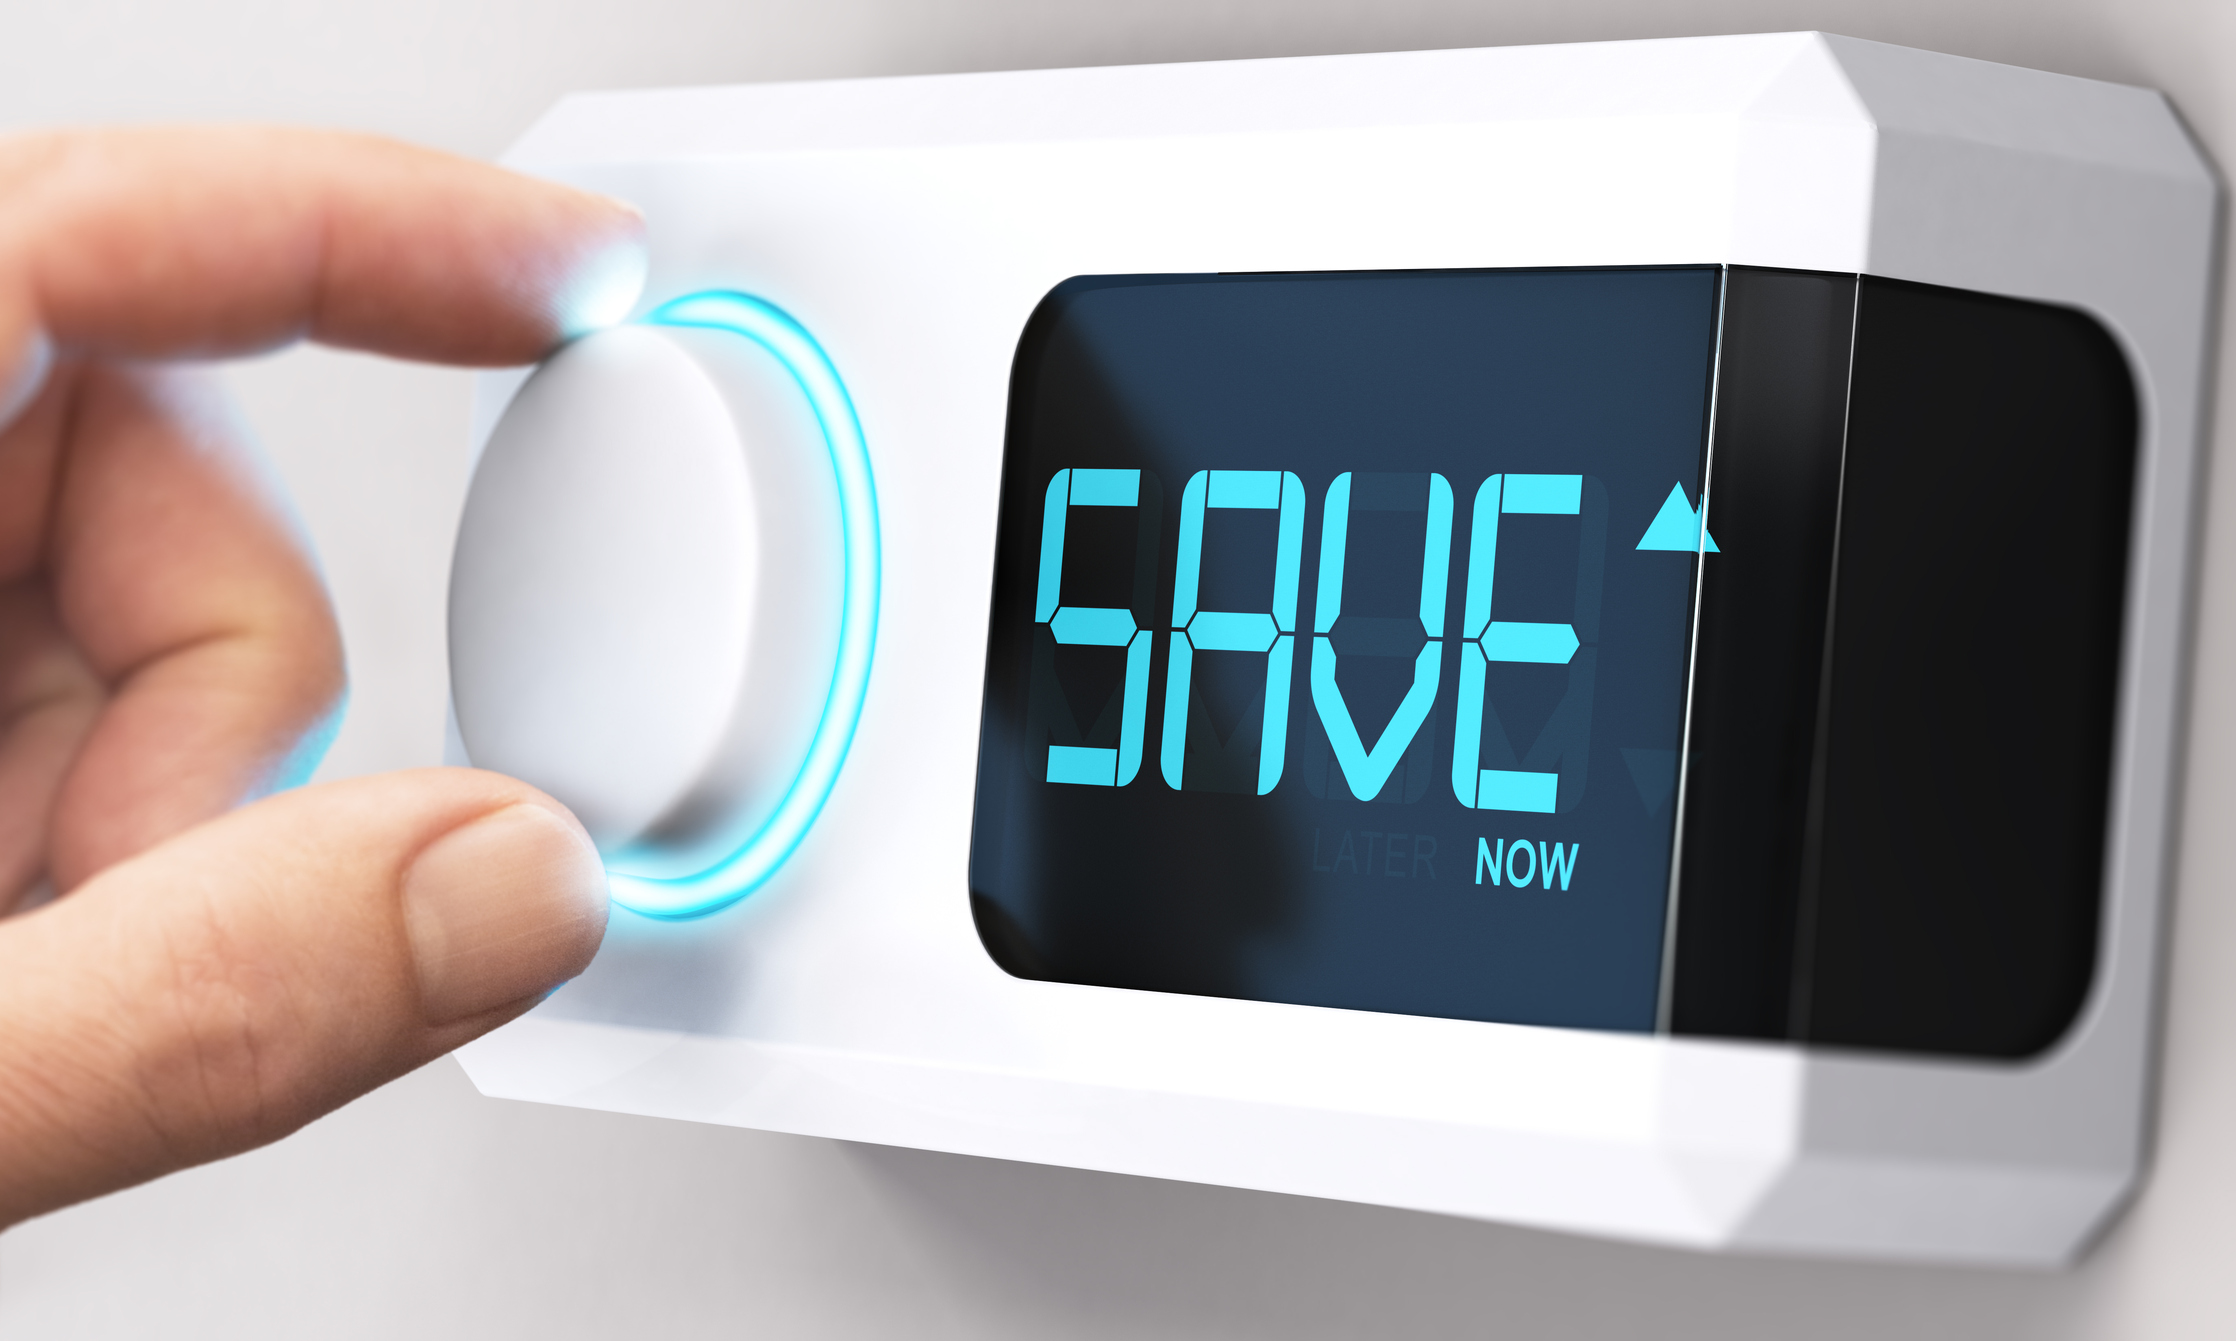 Close-up of a hand turning a knob on a white smart thermostat. Display reads "SAVE".